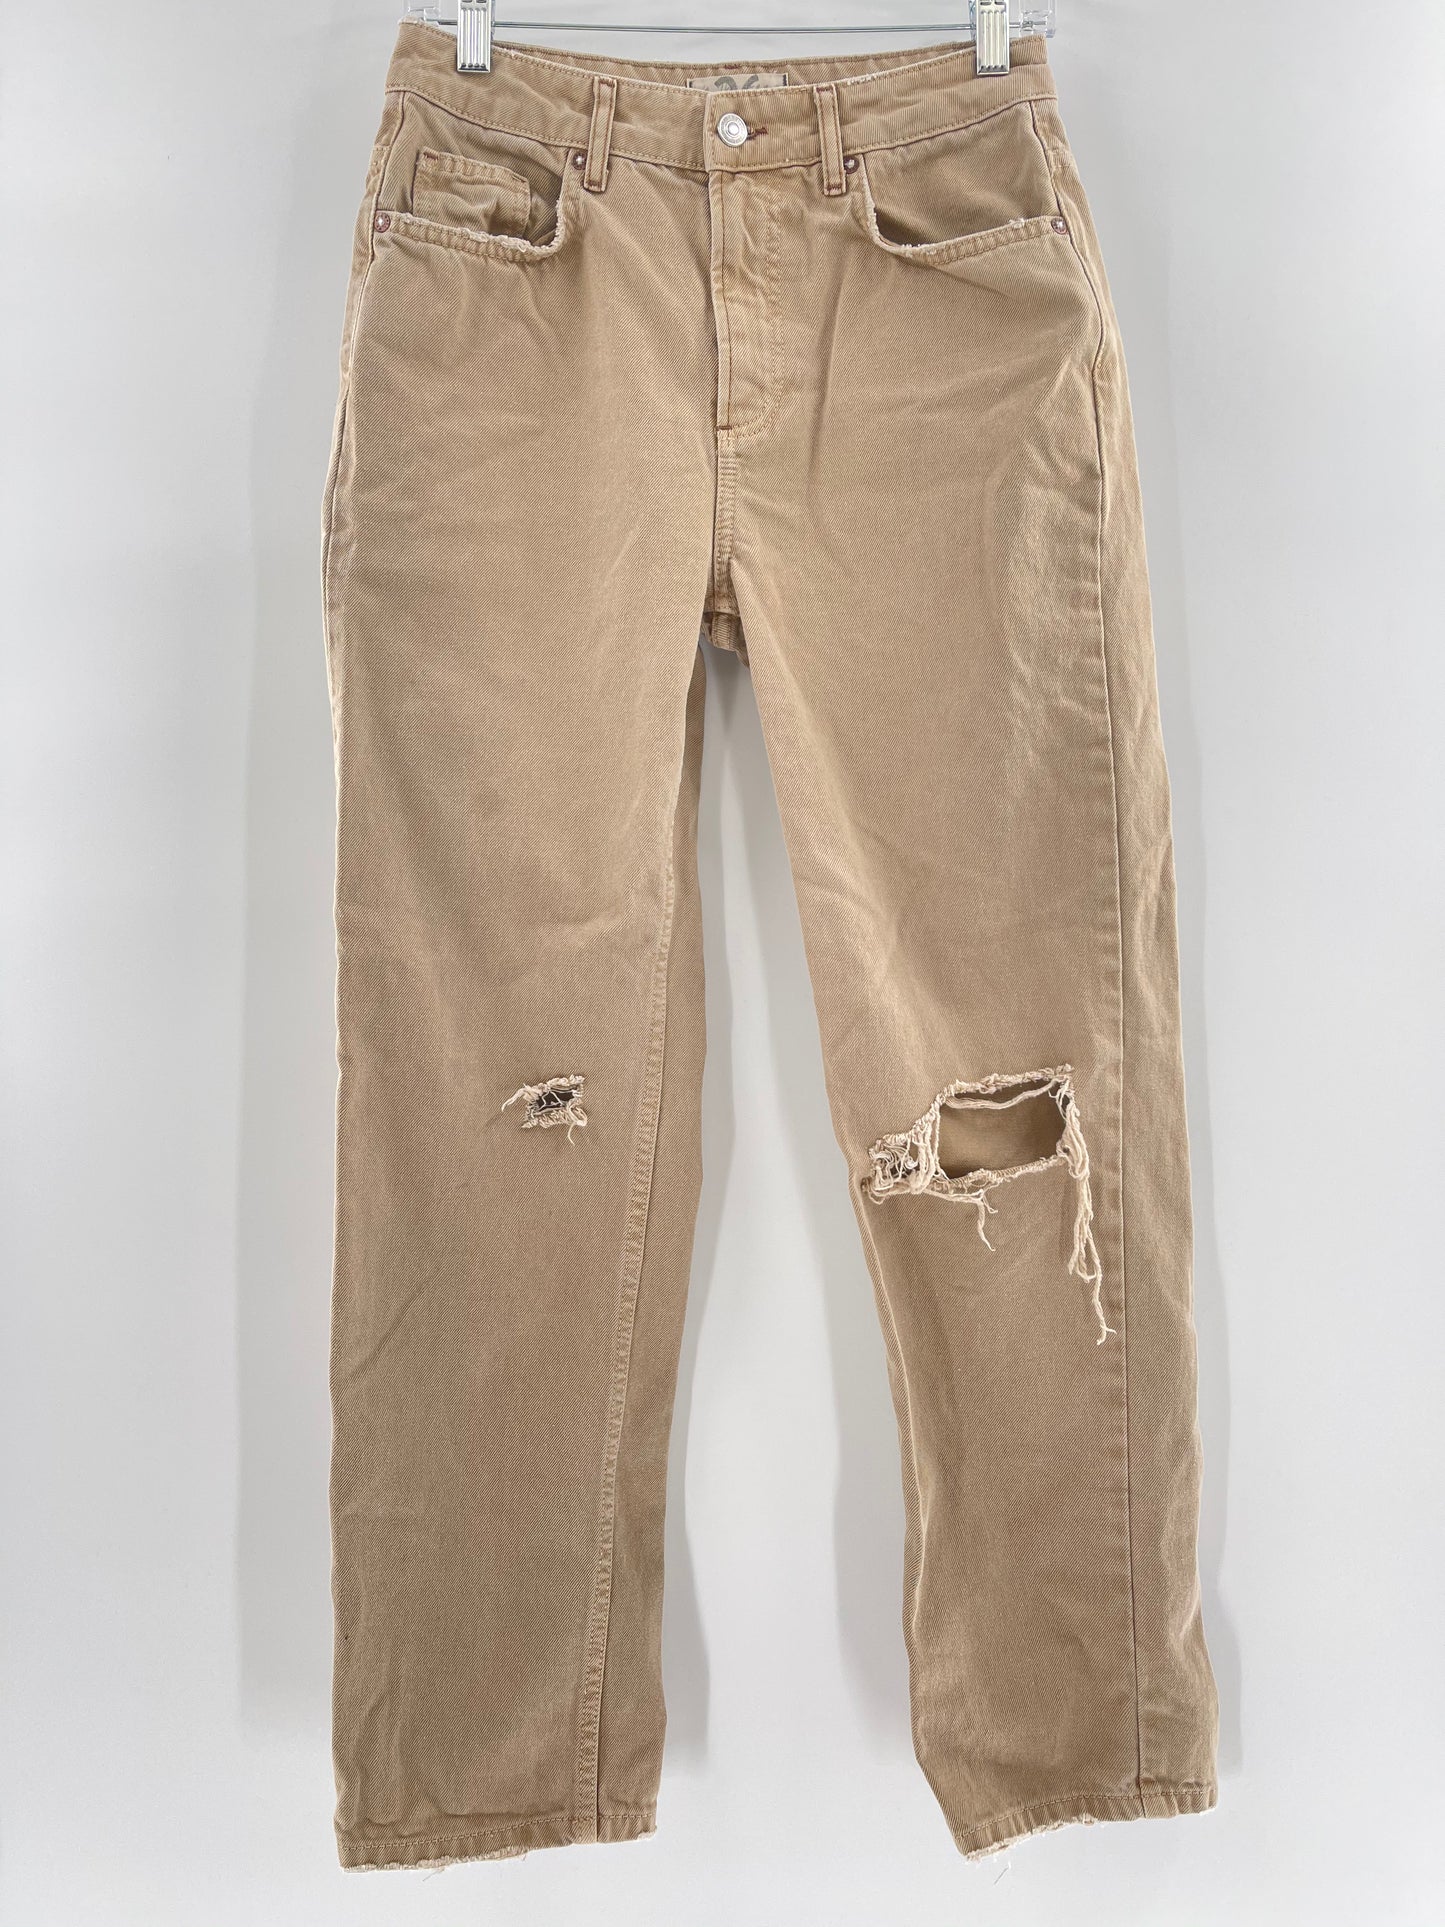 Free People Beige Ripped Jeans (size 26)